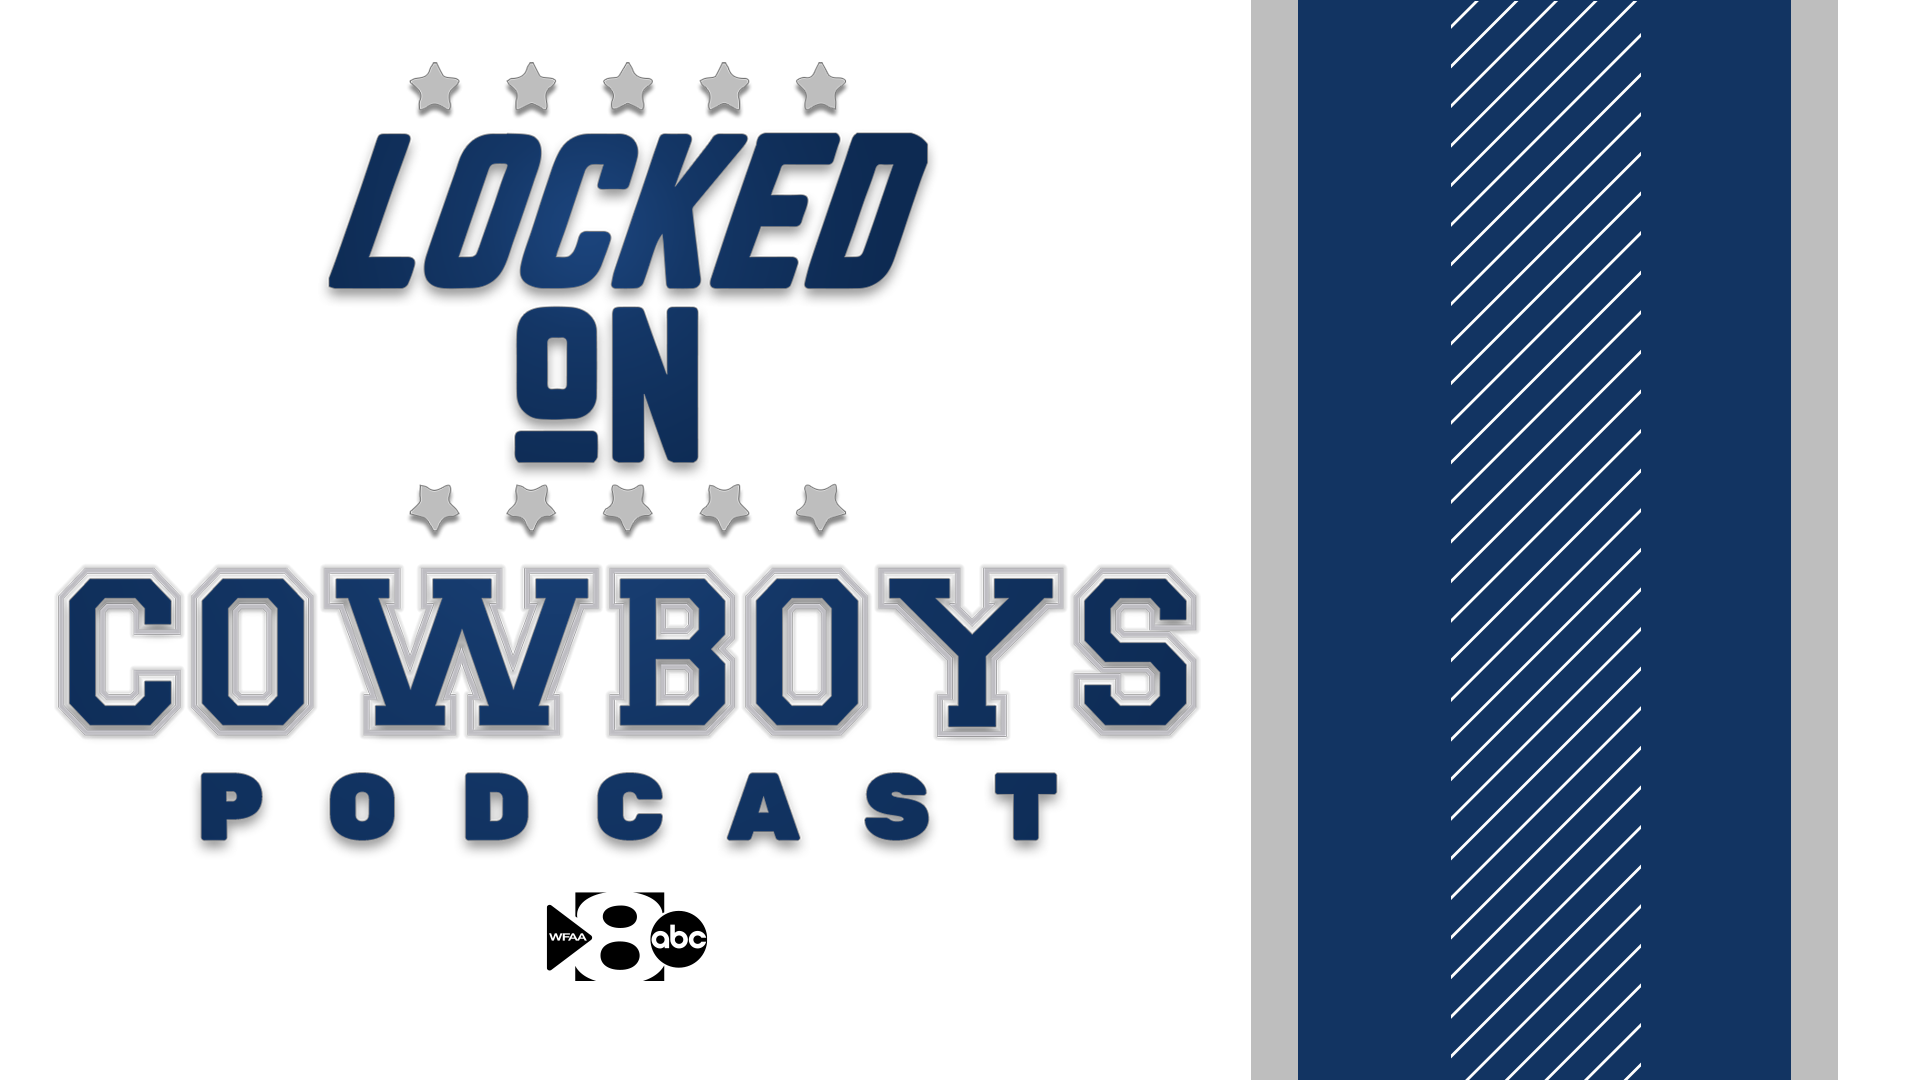 In this episode of the Locked On Cowboys Podcast, @Marcus_Mosher and @McCoolBCB preview the safeties for the Dallas Cowboys entering training camp.